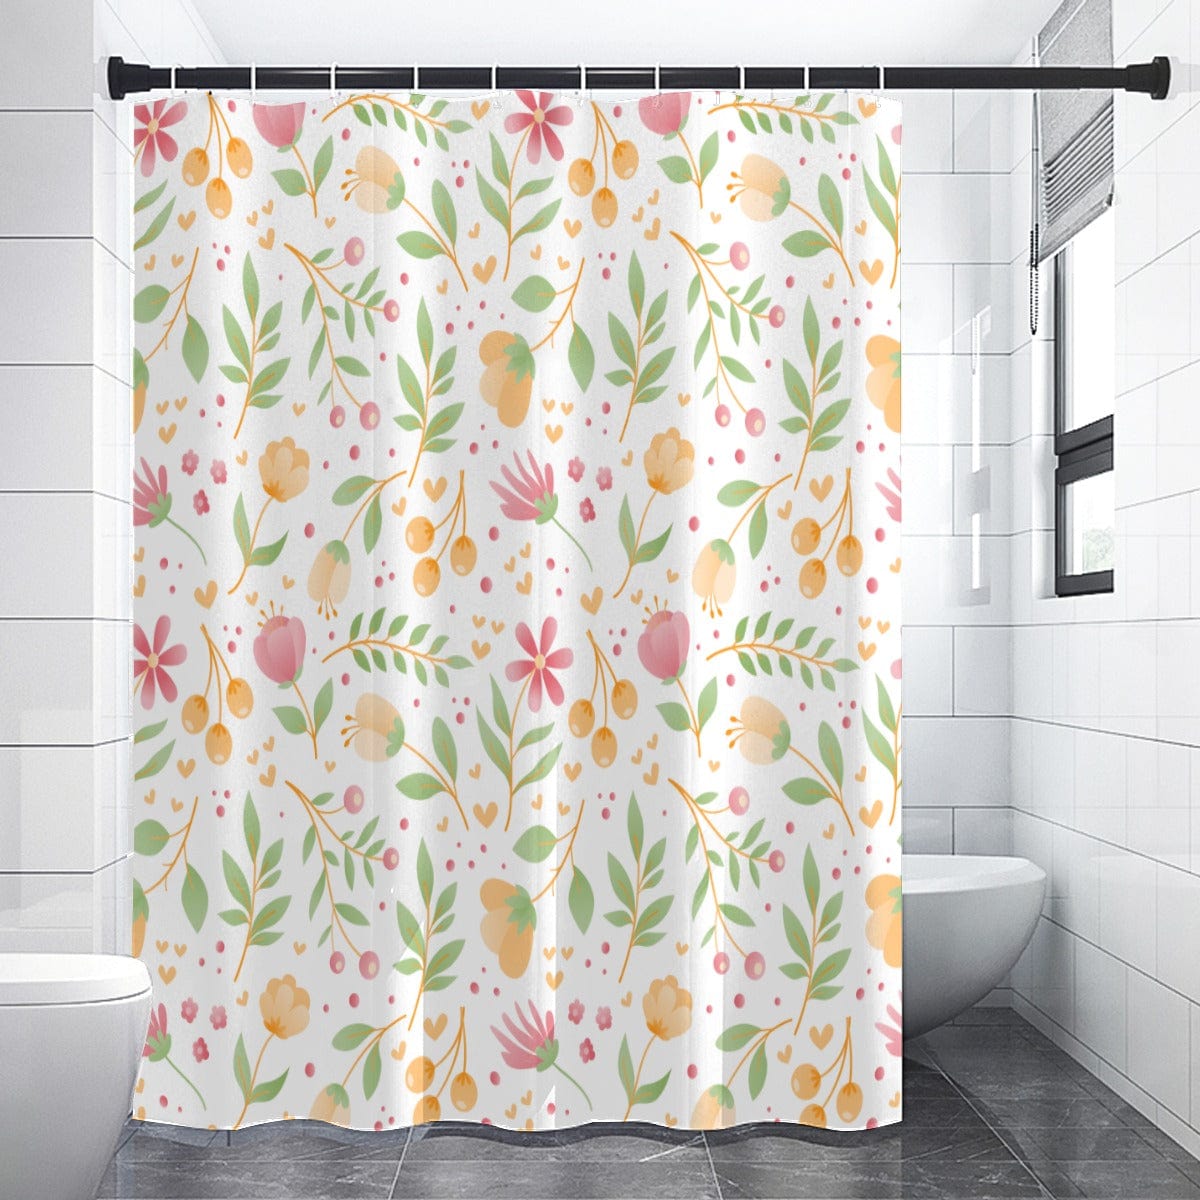 Yoycol Shower Curtain 150*180CM(59.1"*70.9") / White Spring Flowers Shower Curtains 150（gsm）